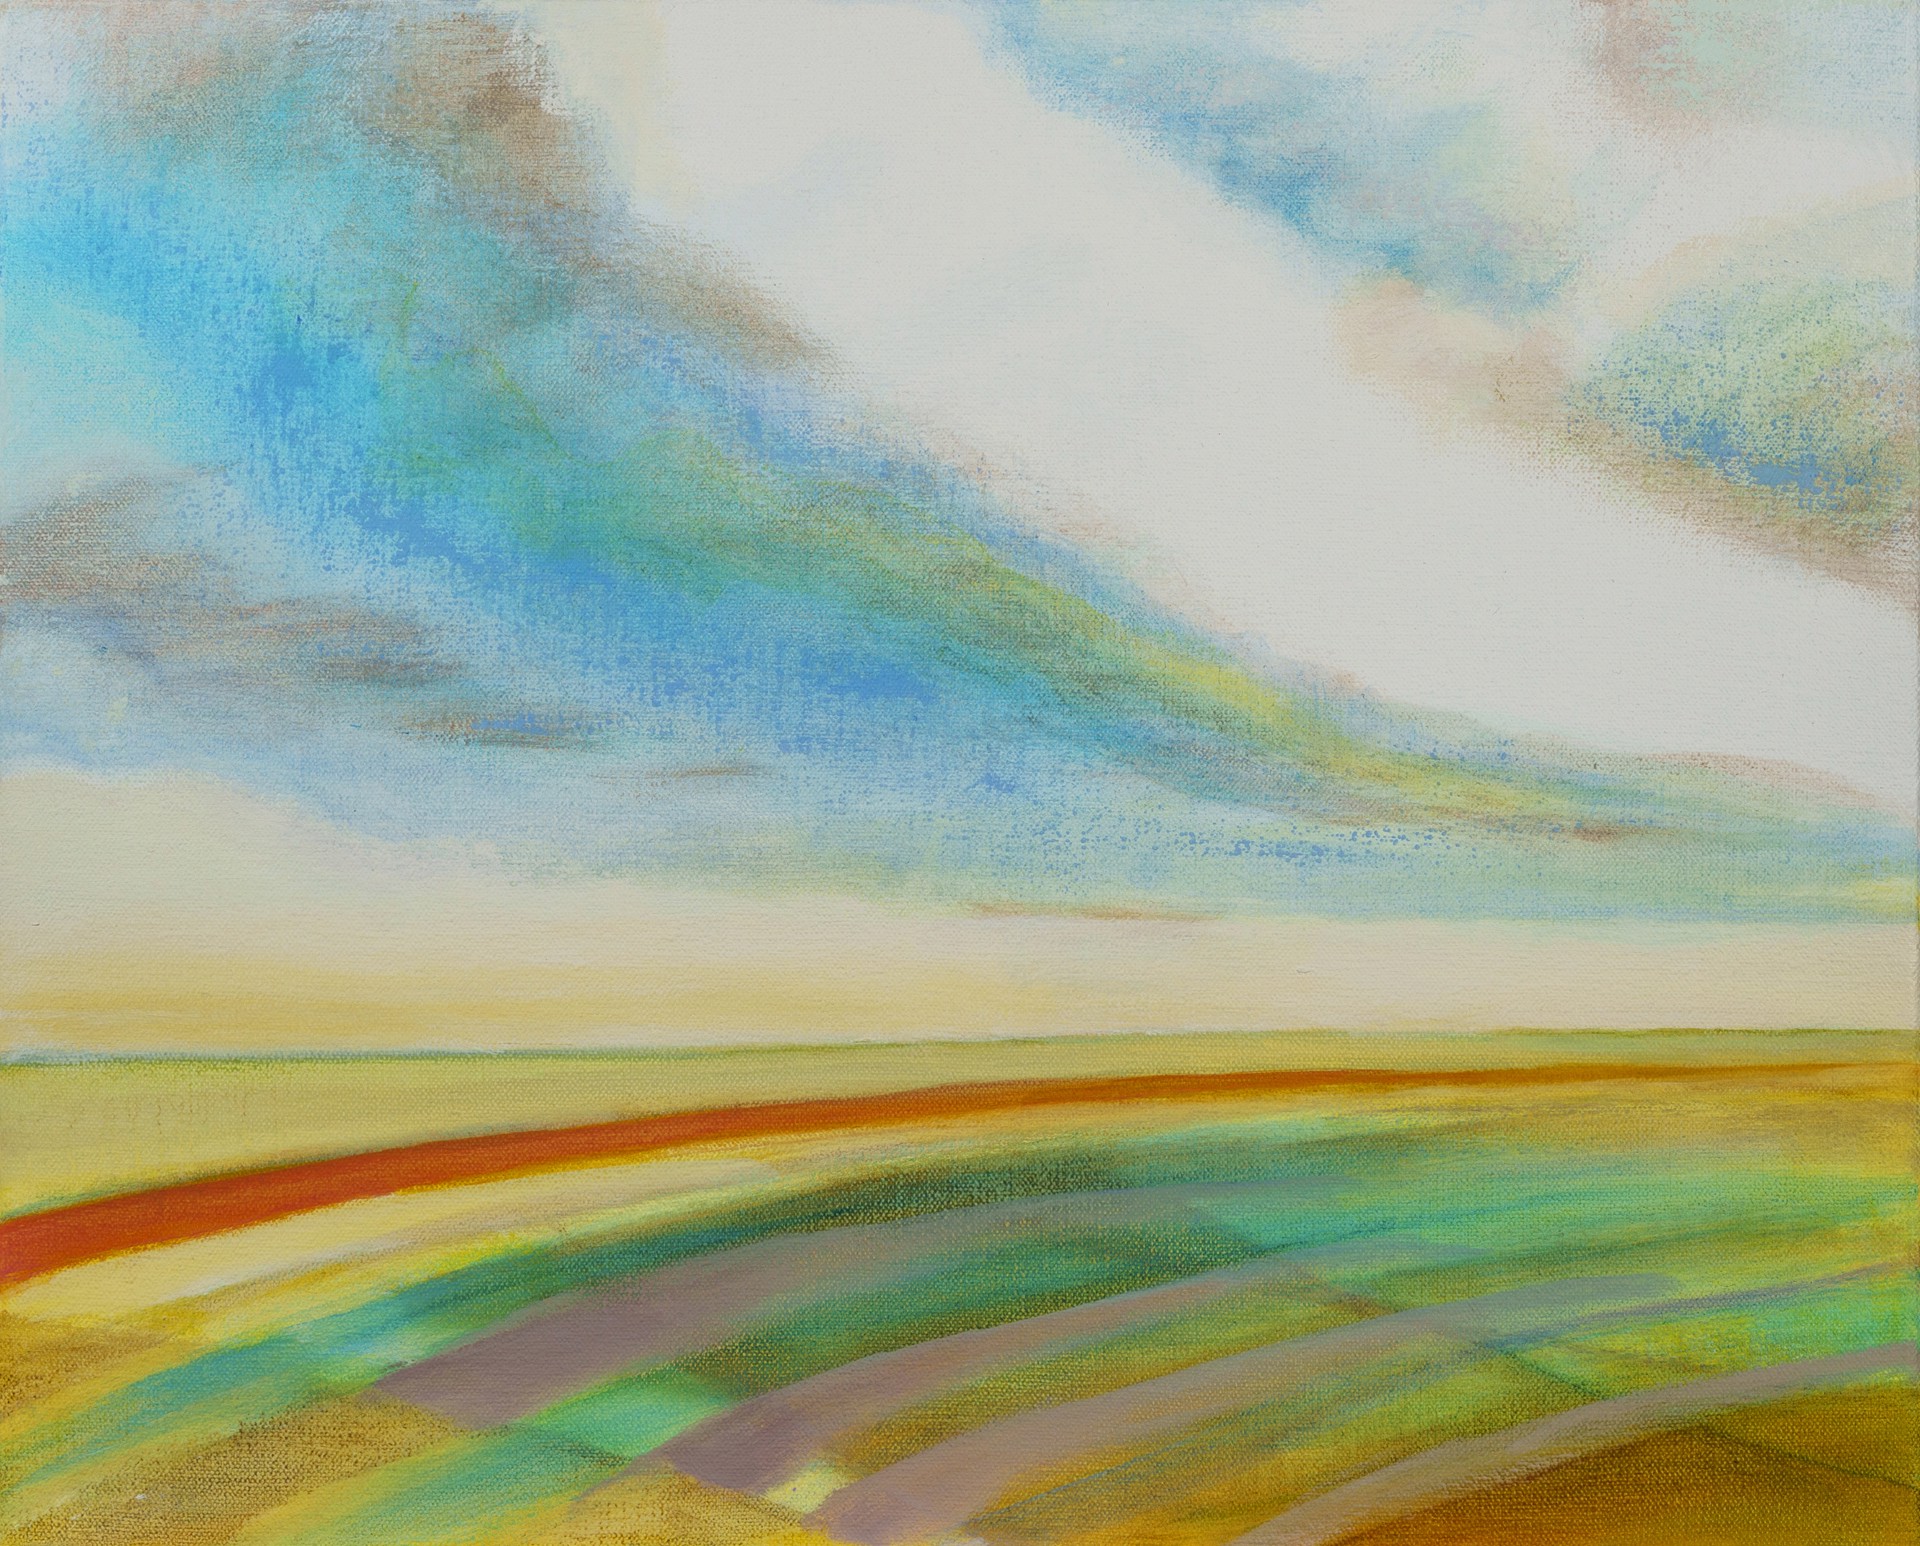 Land and Sky by Susan Maakestad